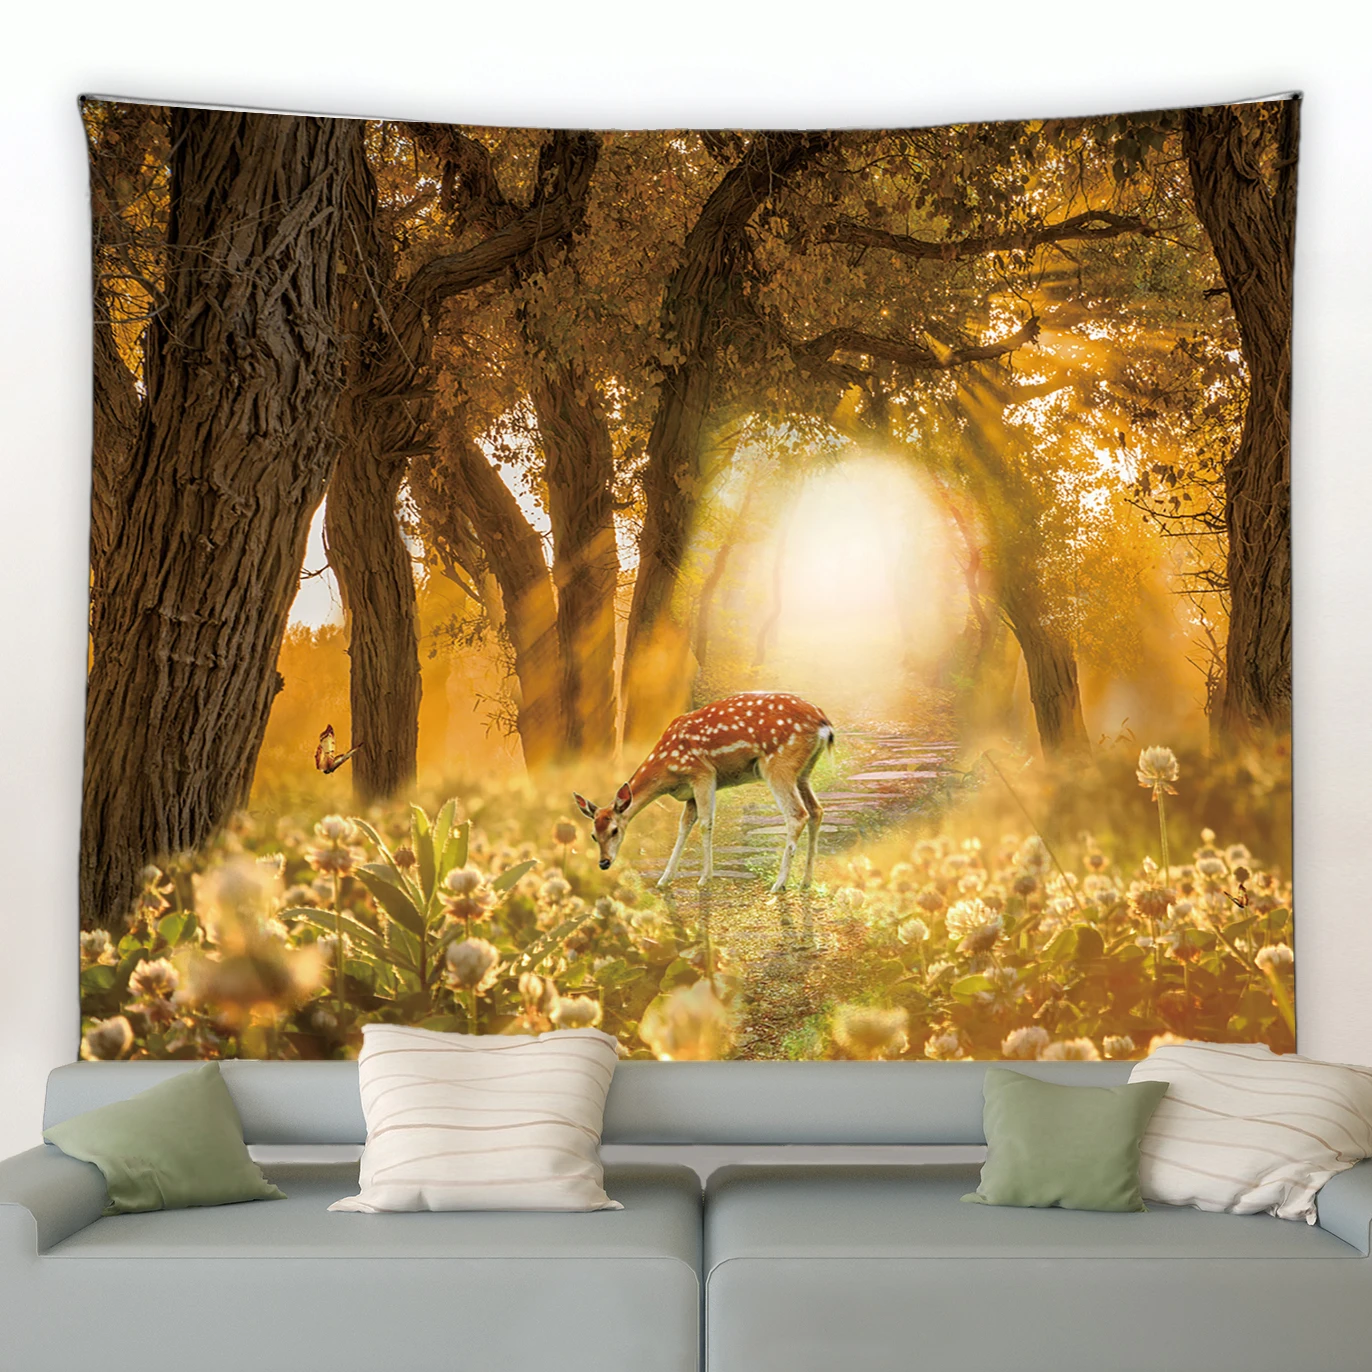 

Elk Printed Wall Hanging Tapestry Autumn Forest Deer Wall Hanging Cloth Tapestry Boho Bedspread Blanket Carpet Throw Yoga Mat